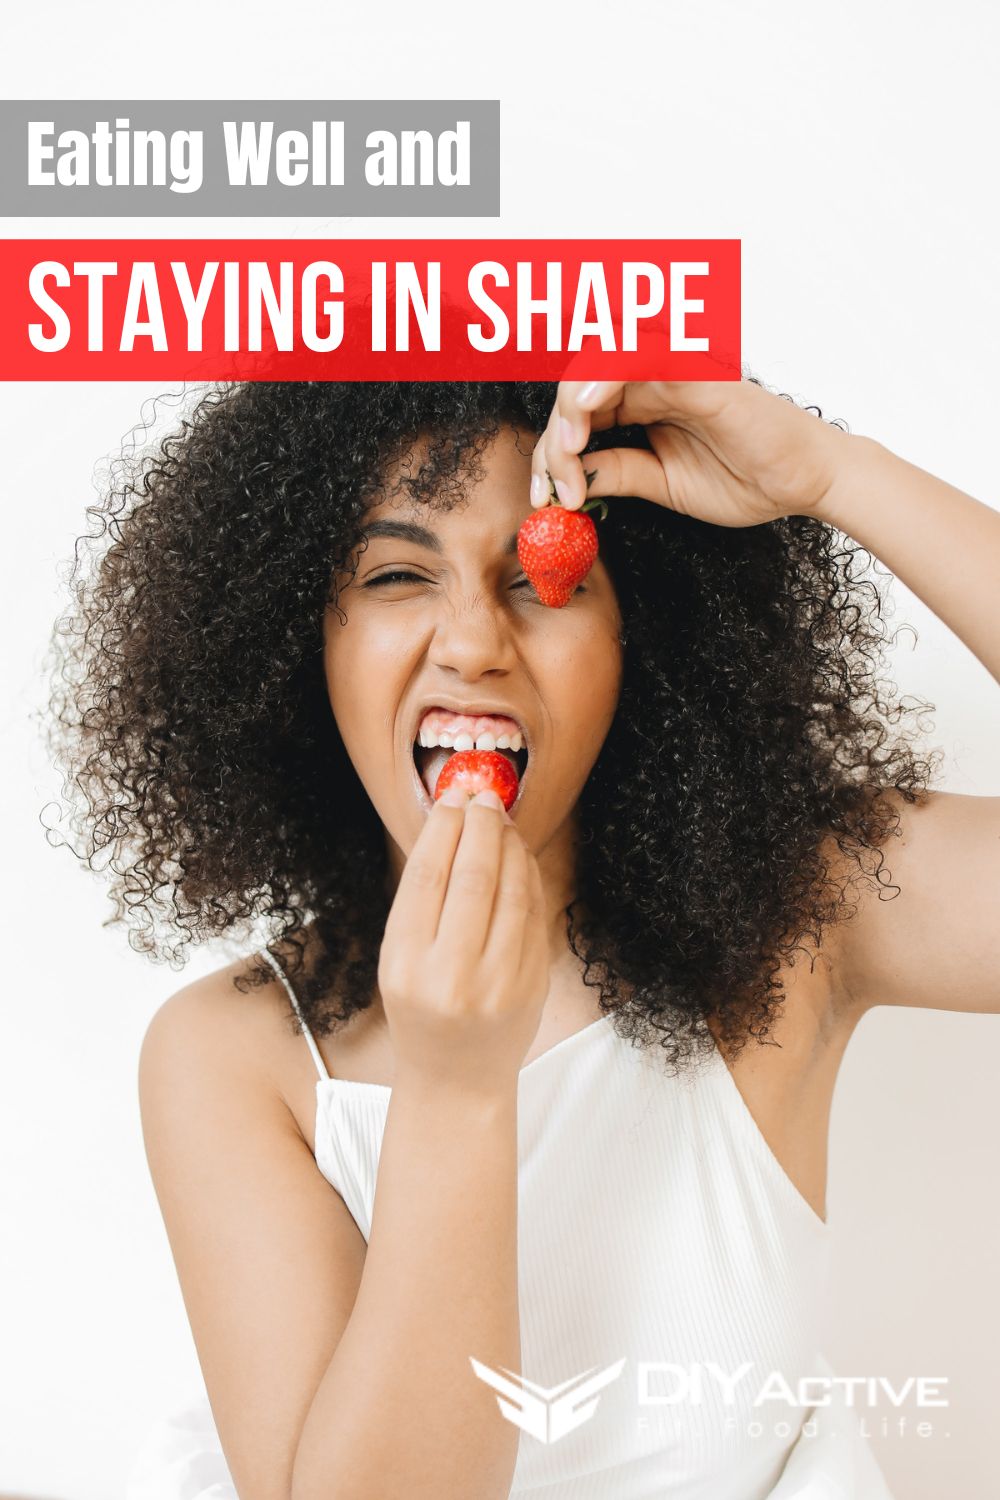 4 Tips For Eating Well and Staying In Shape 2